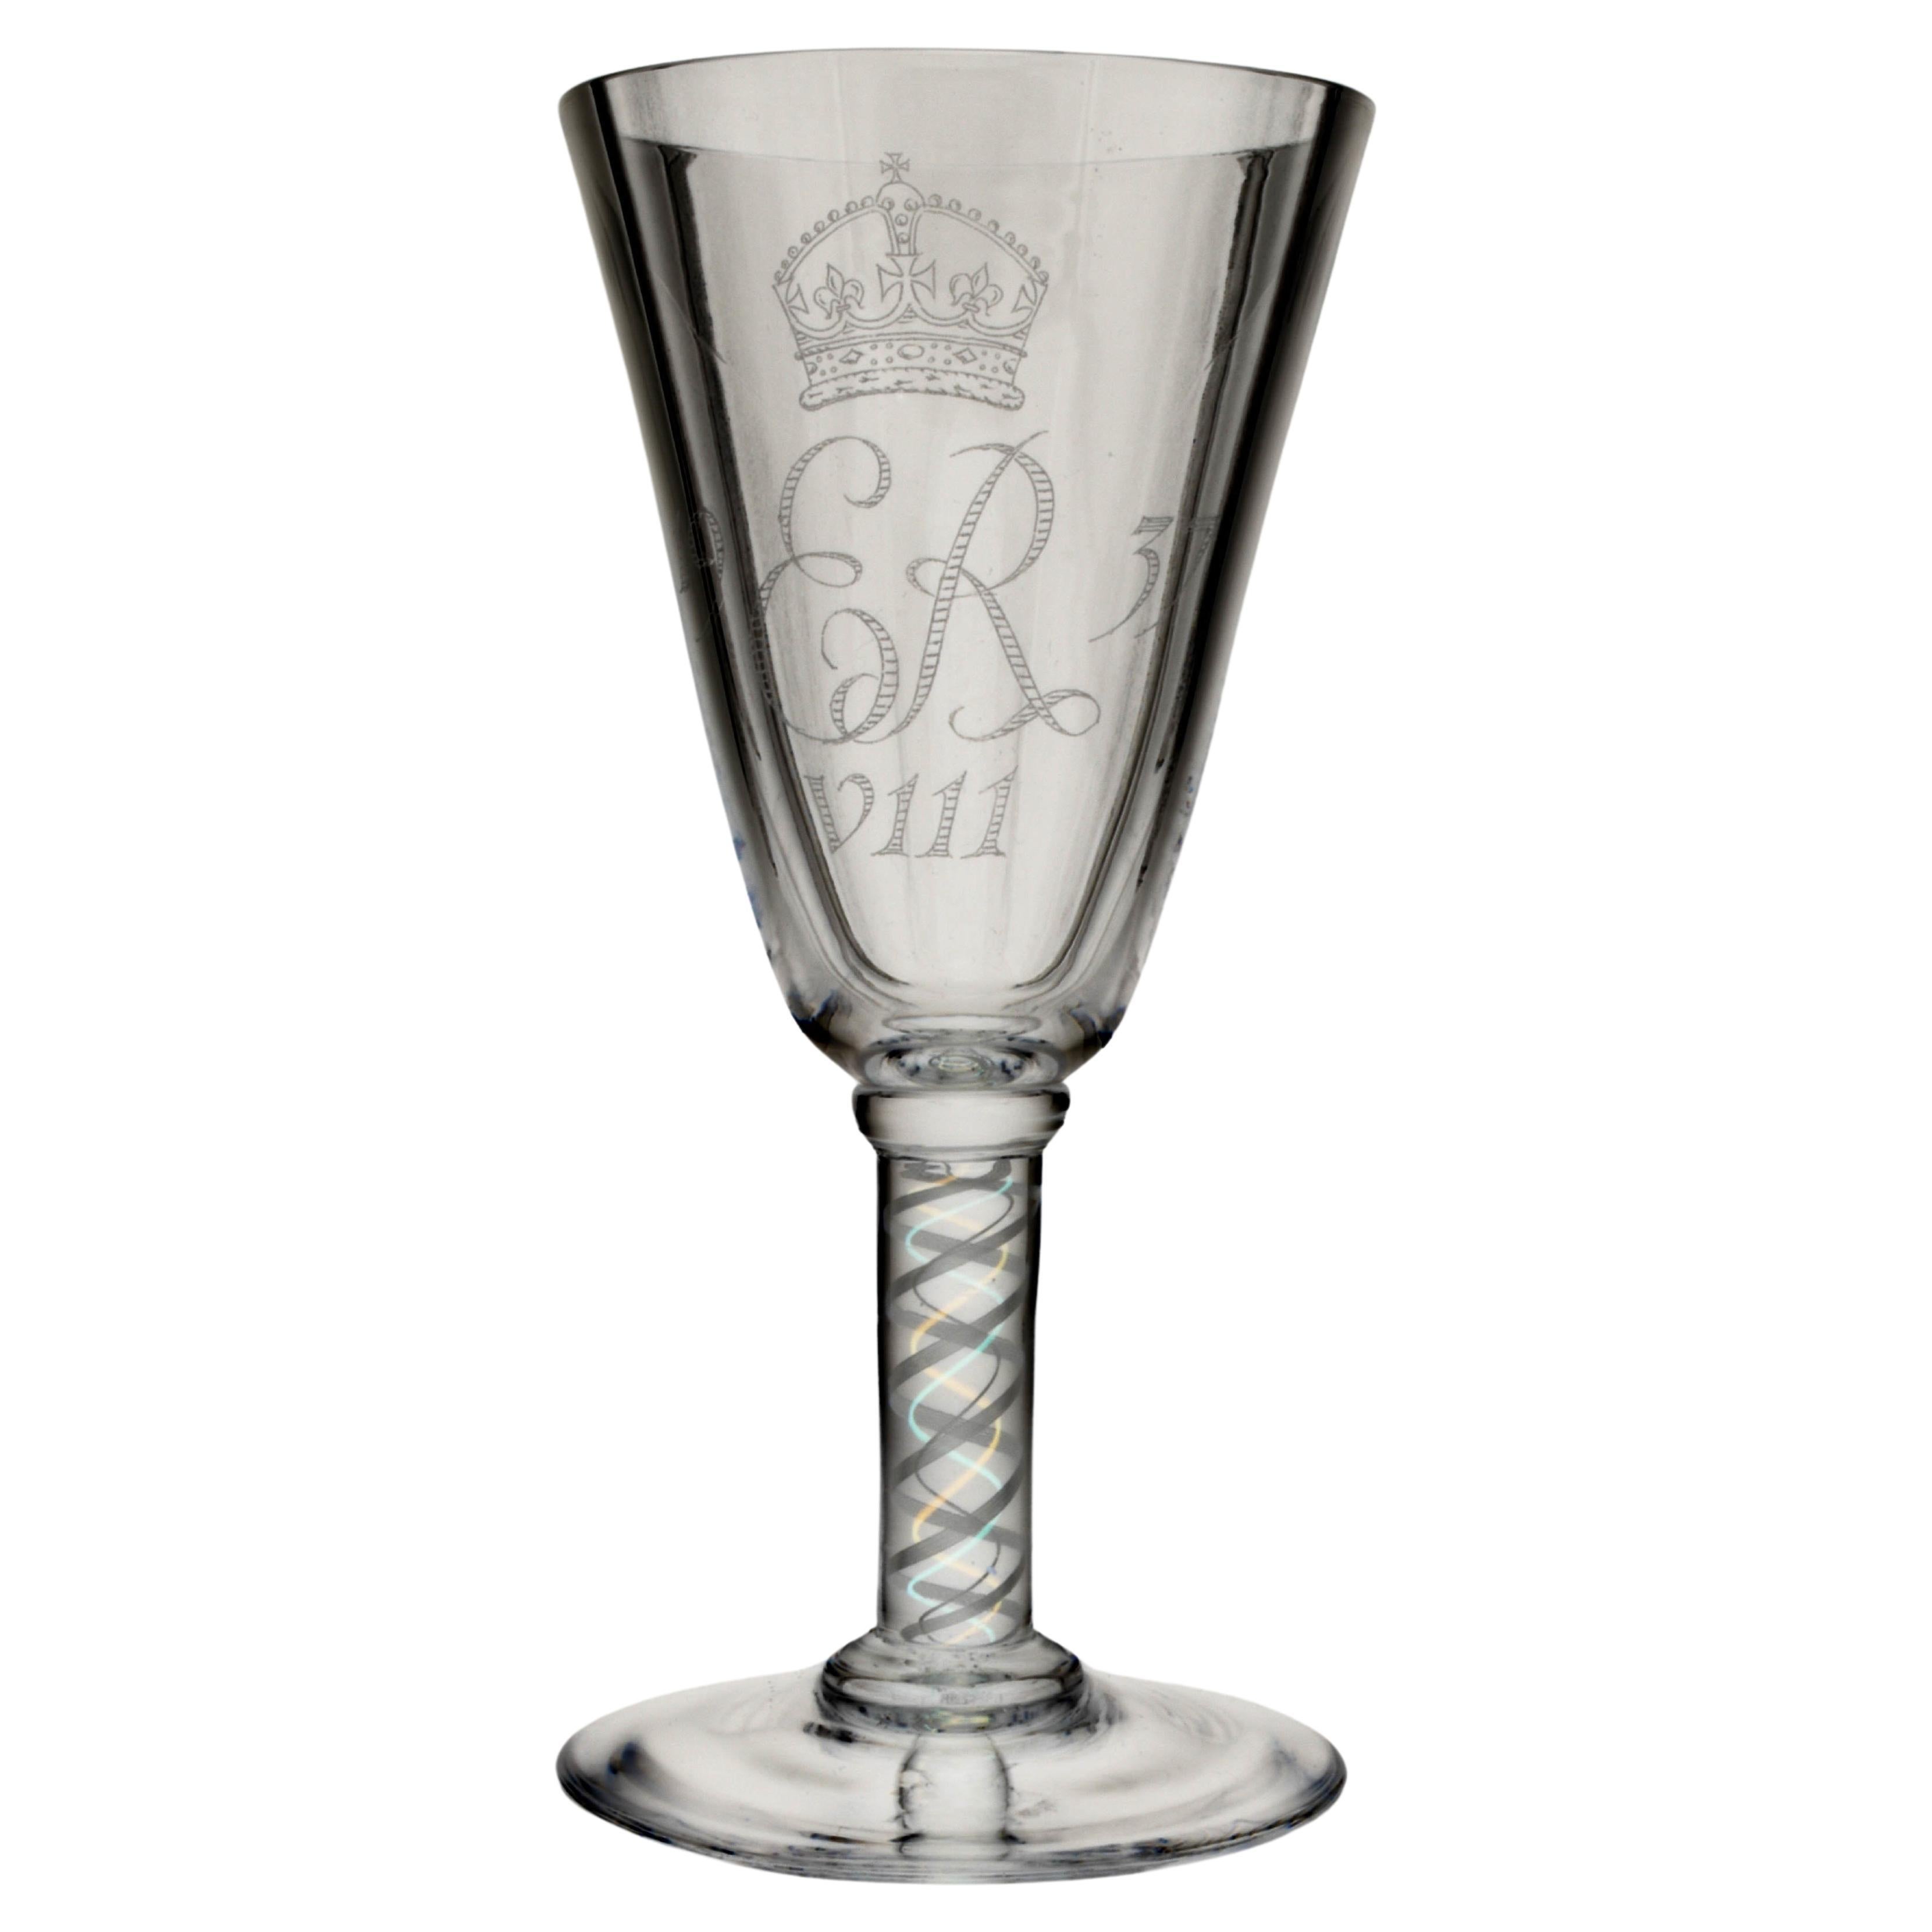 Oversized wine glass with airtwist stem, for the Coronation of Edward VIII 1937